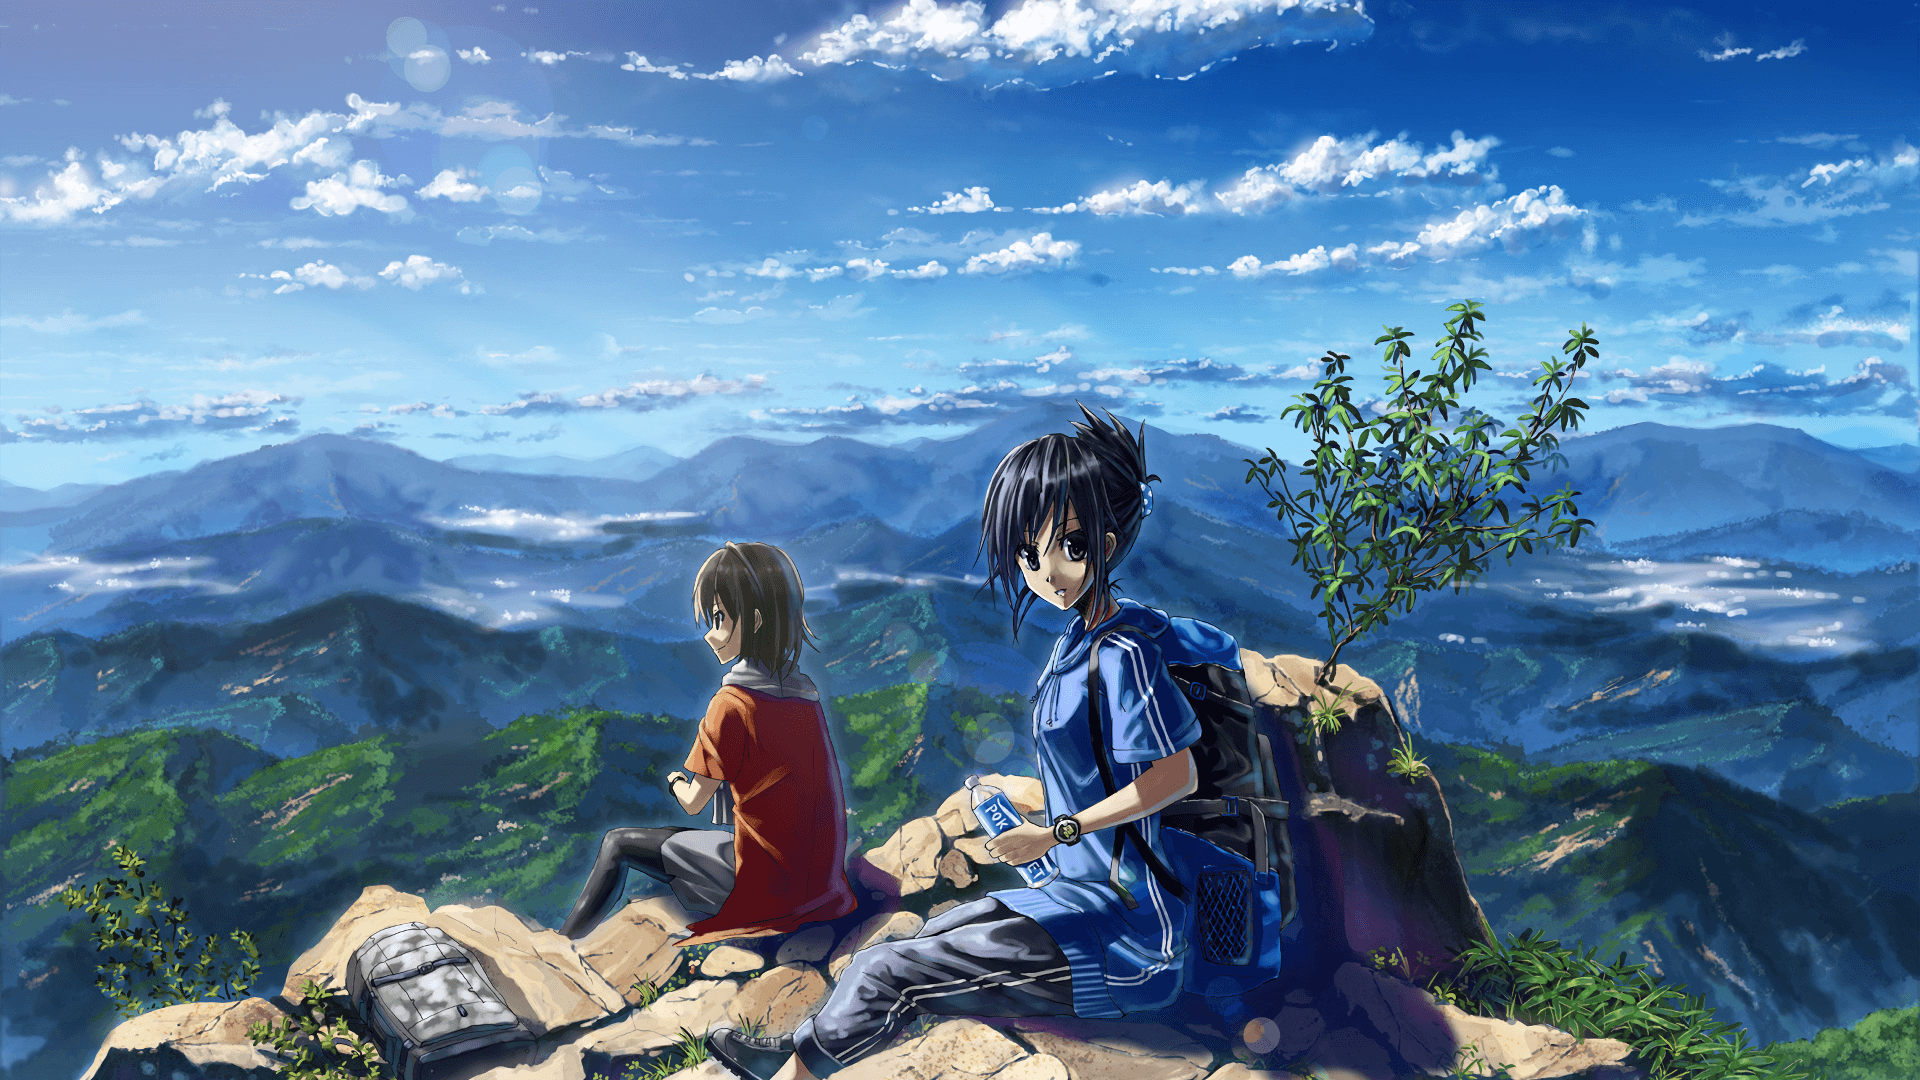 Anime Landscape, Mountains, Clouds, Sky, Girl, Hiking